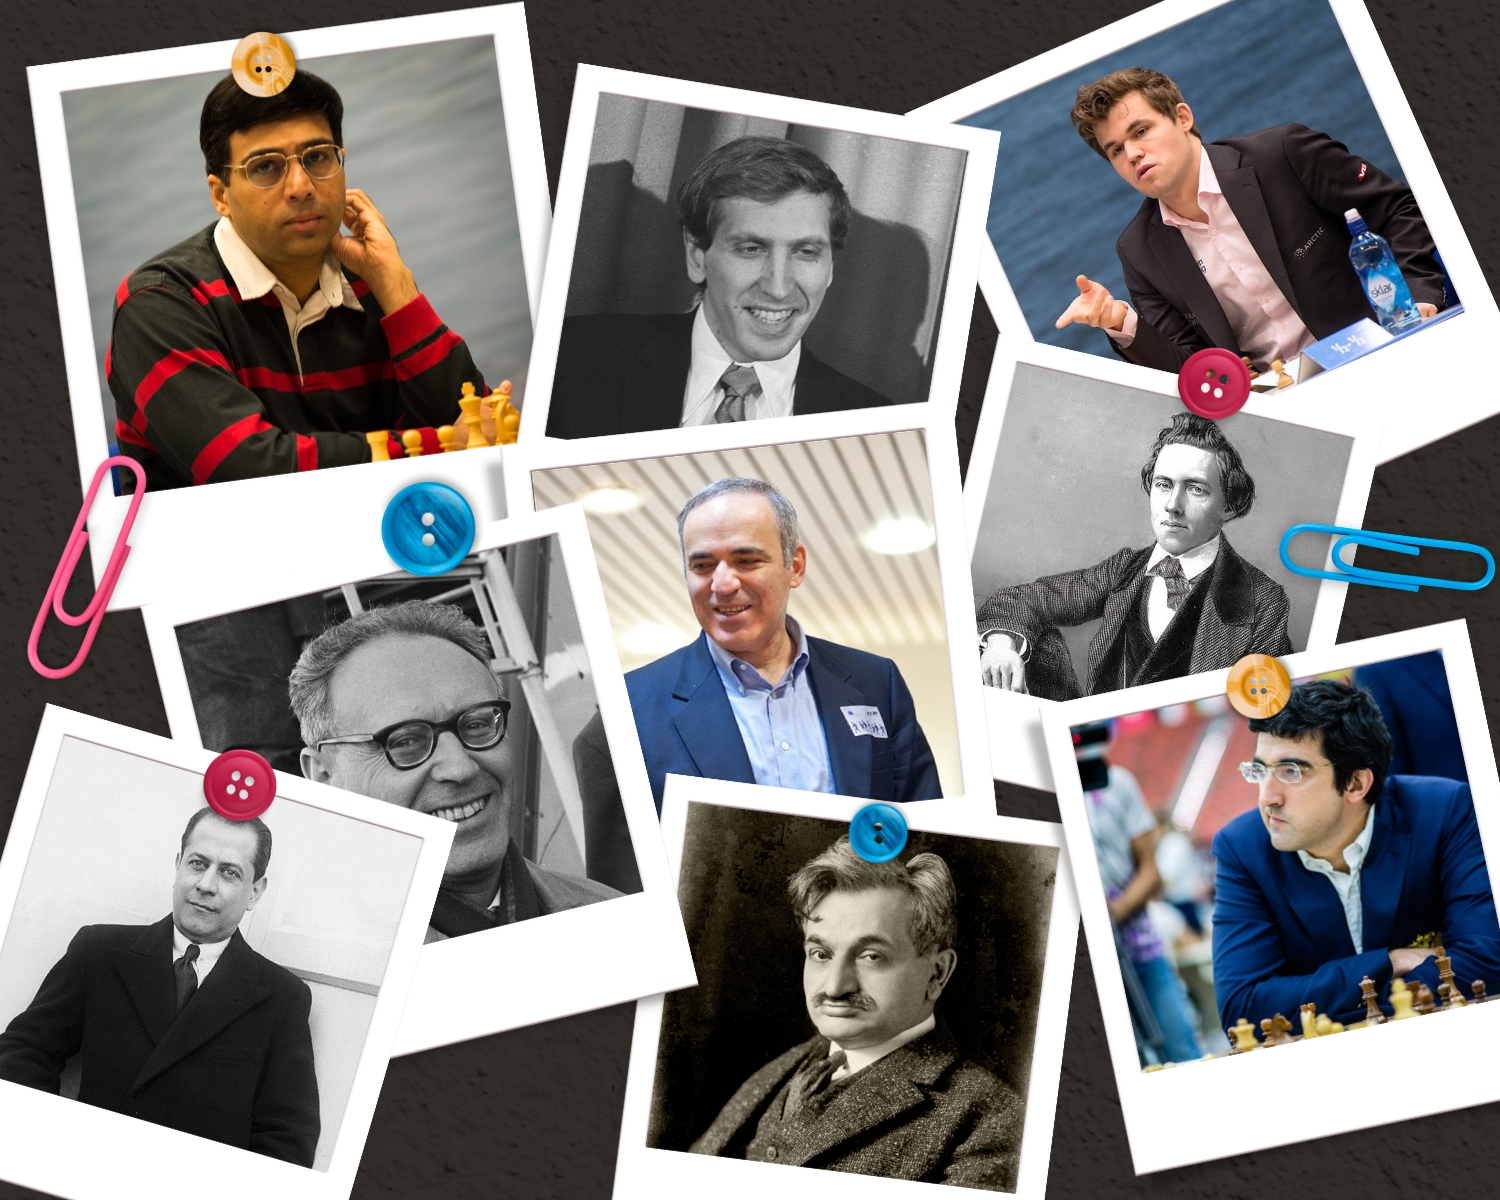 How Would You Rank The Greatest Chess Players Ever? 